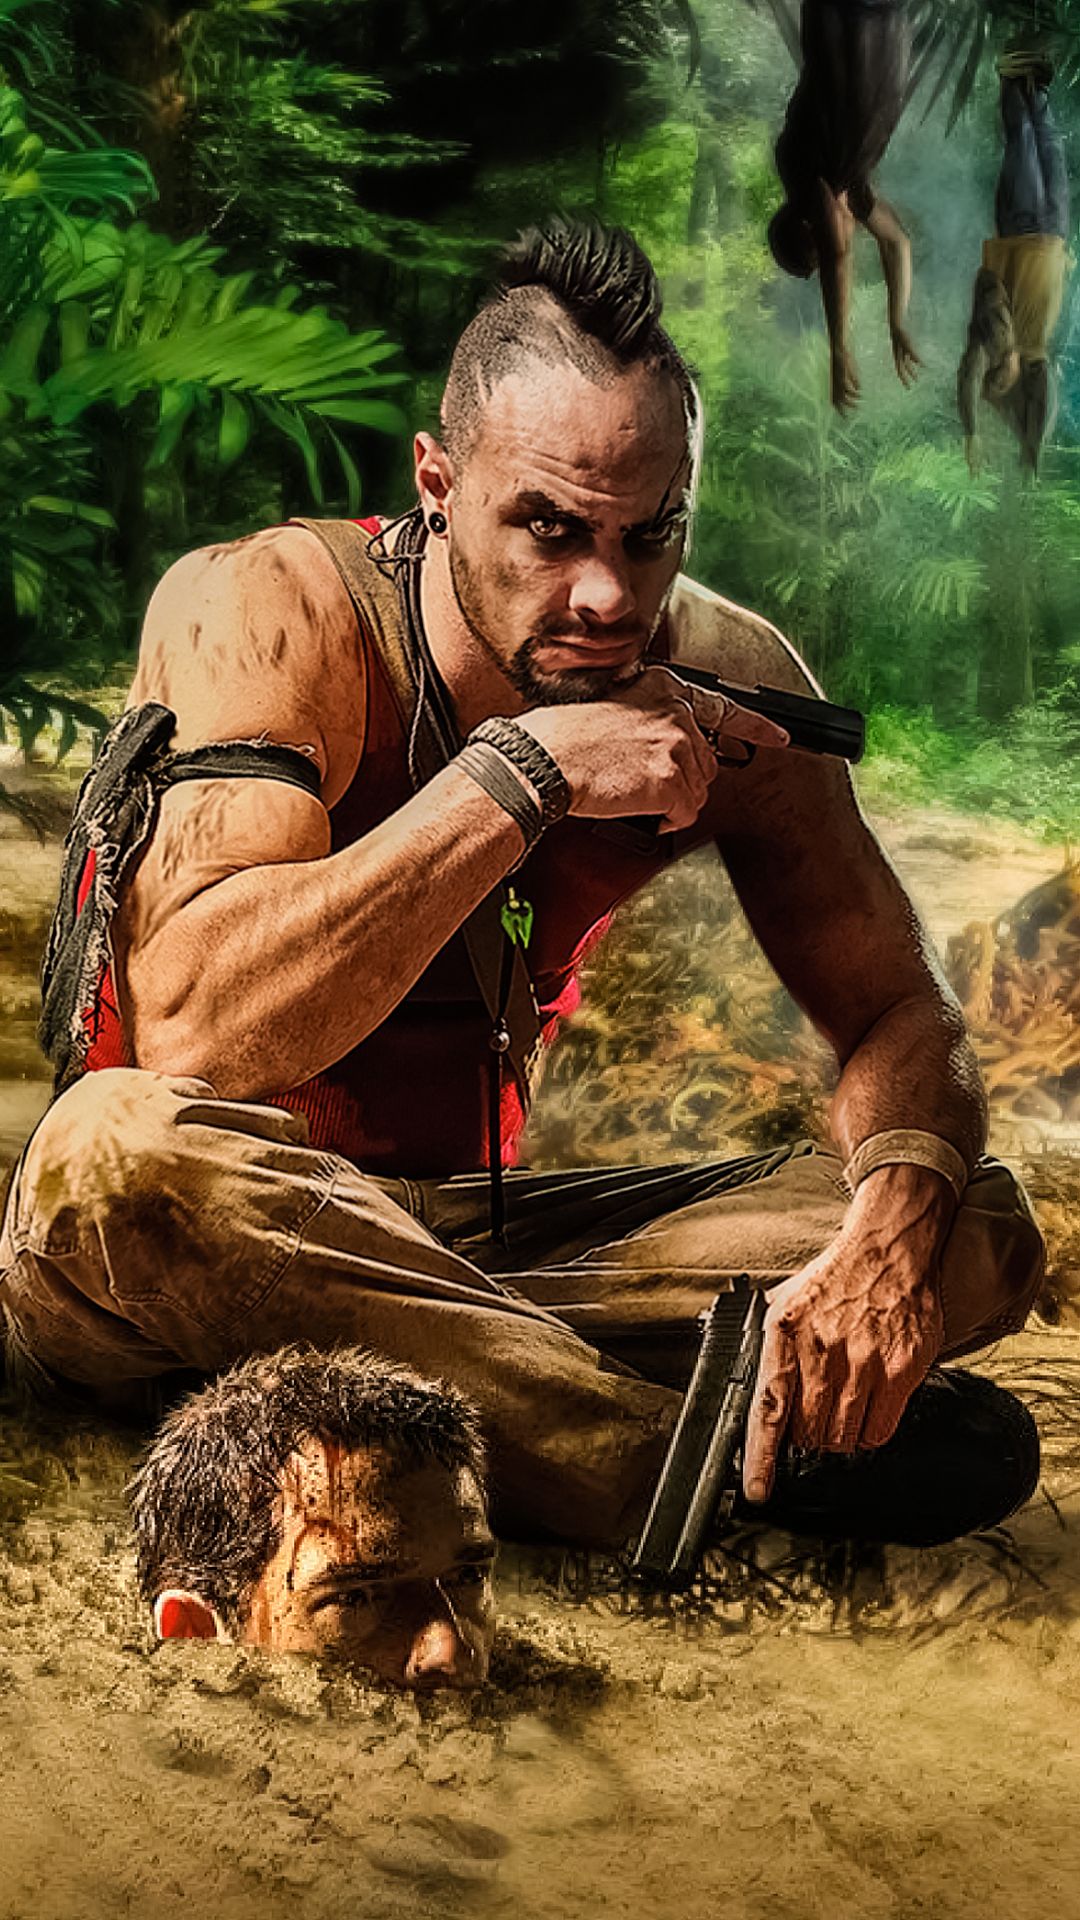 far cry 3 wallpaper 1920x1080 (88+ images) on far cry 3 mobile wallpapers